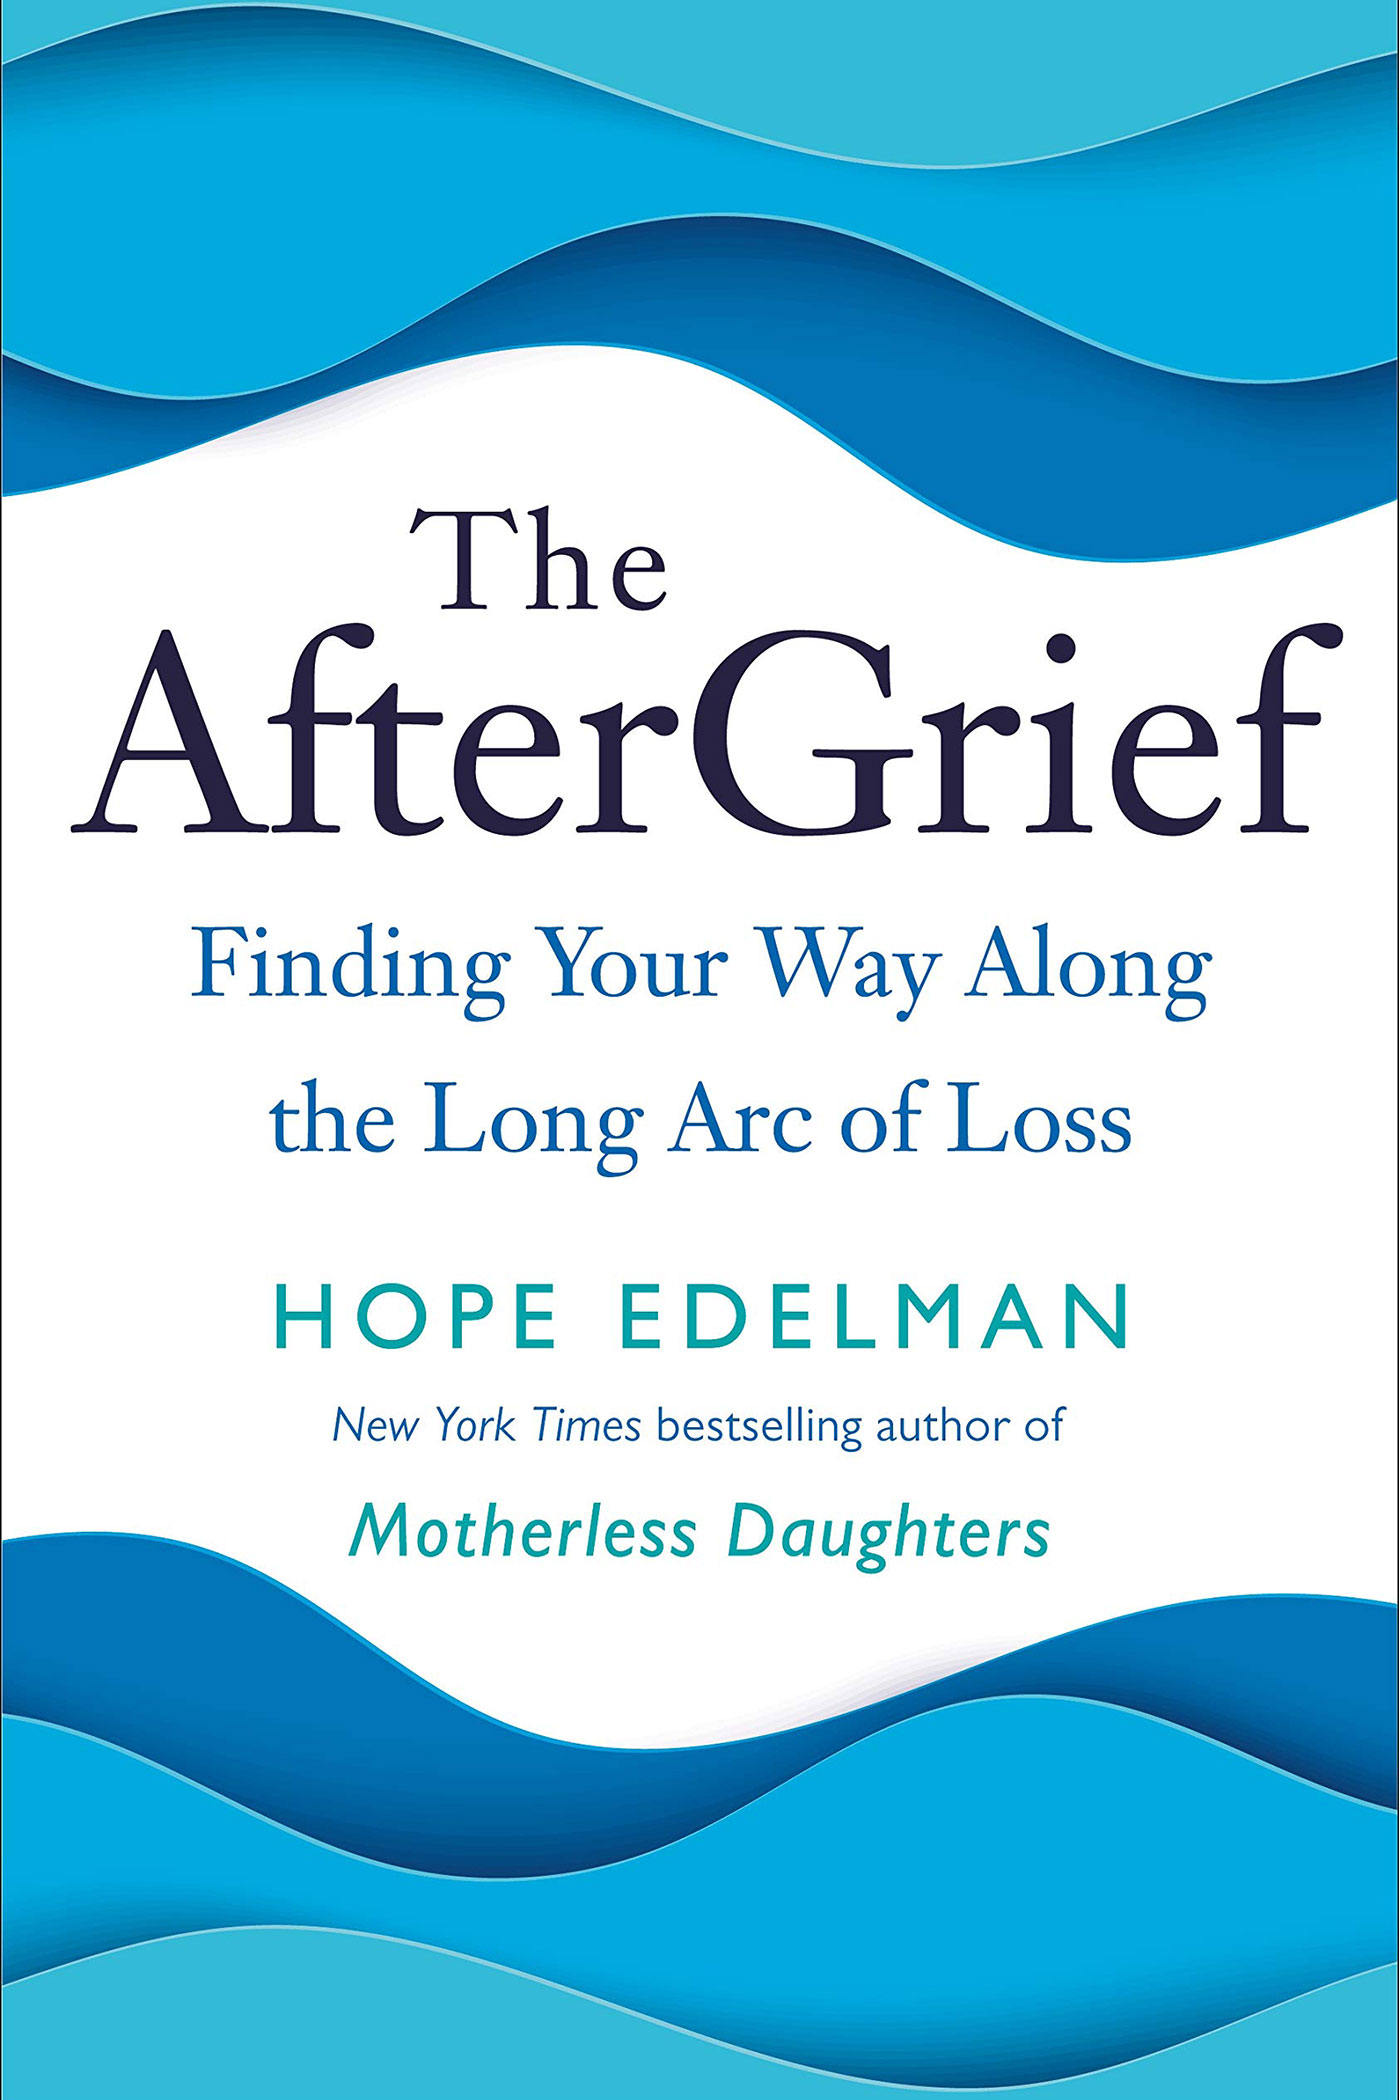 The AfterGrief book cover